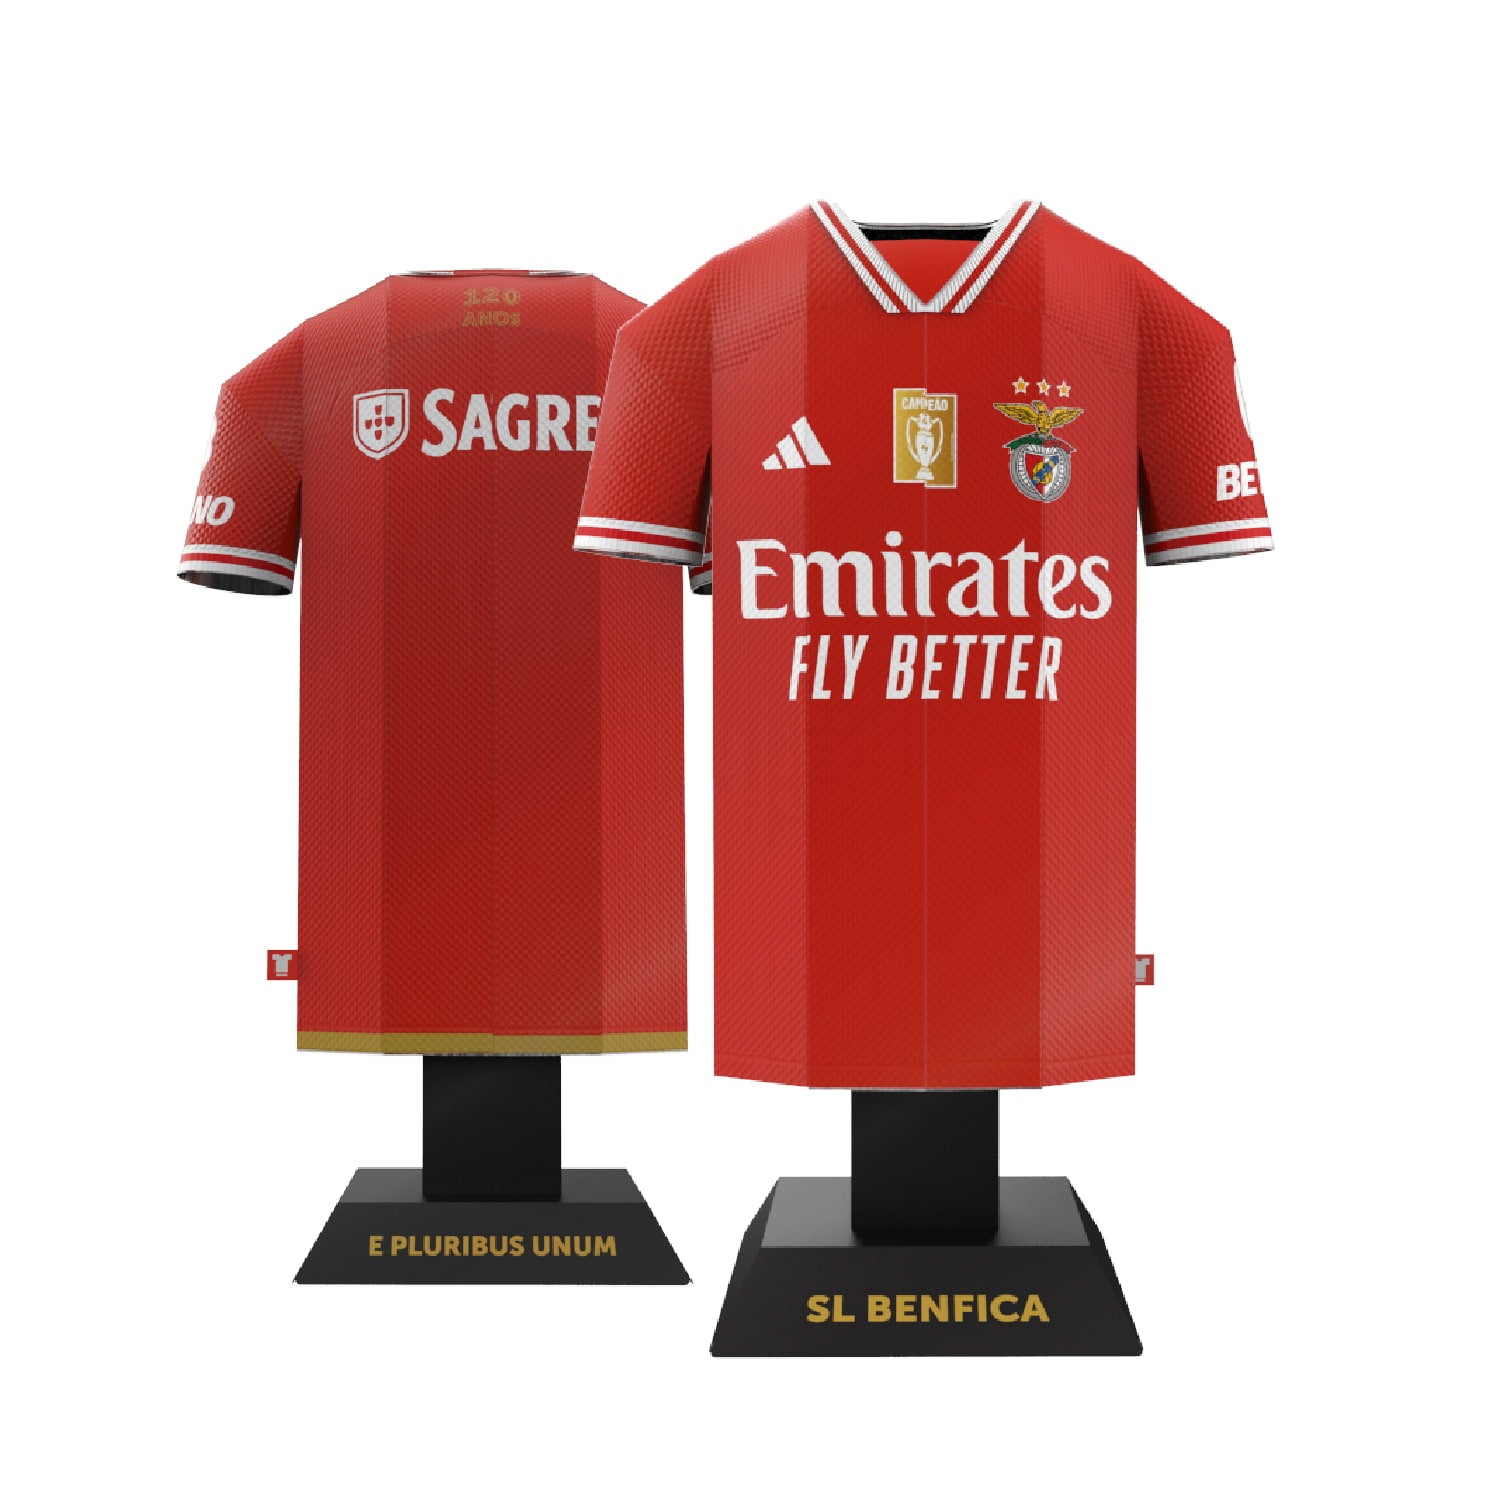 Benfica kit with front and back view